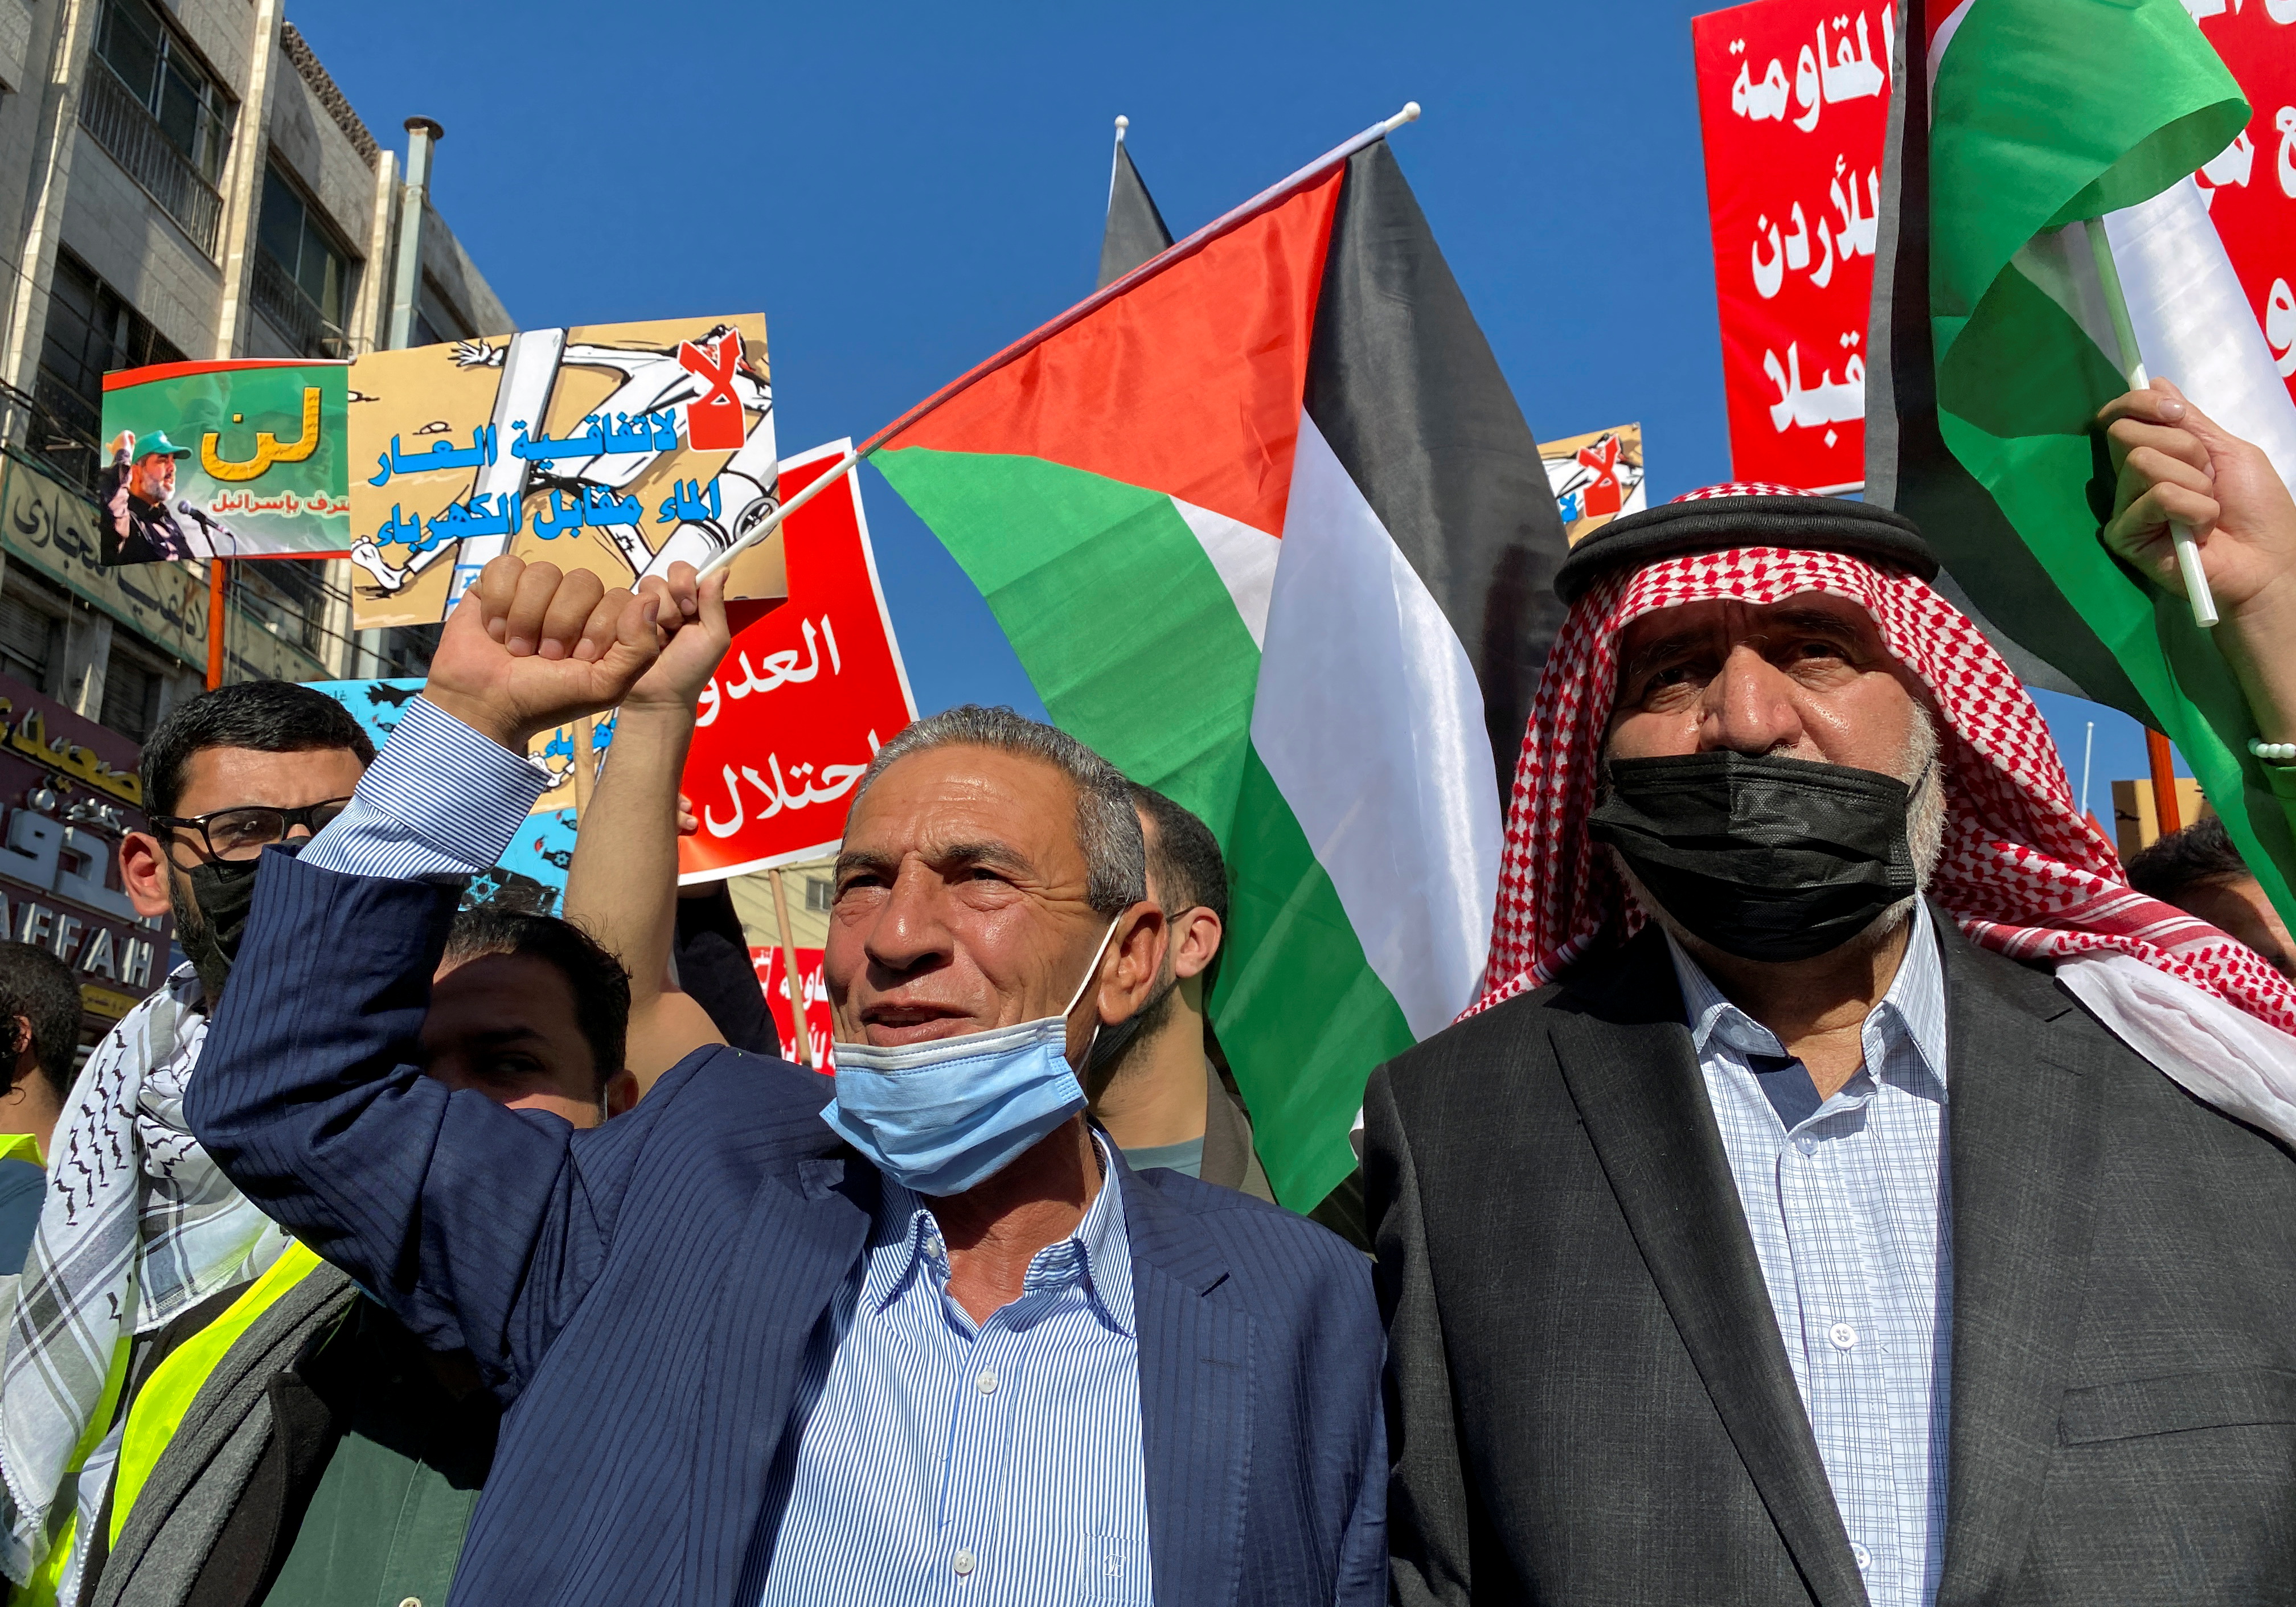 Jordanians carry flags and placards as they demonstrate against the declaration of intent for water-for-energy deal signed by Israel, Jordan and the UAE, in Amman, Jordan November 26, 2021. REUTERS/Muath Freij